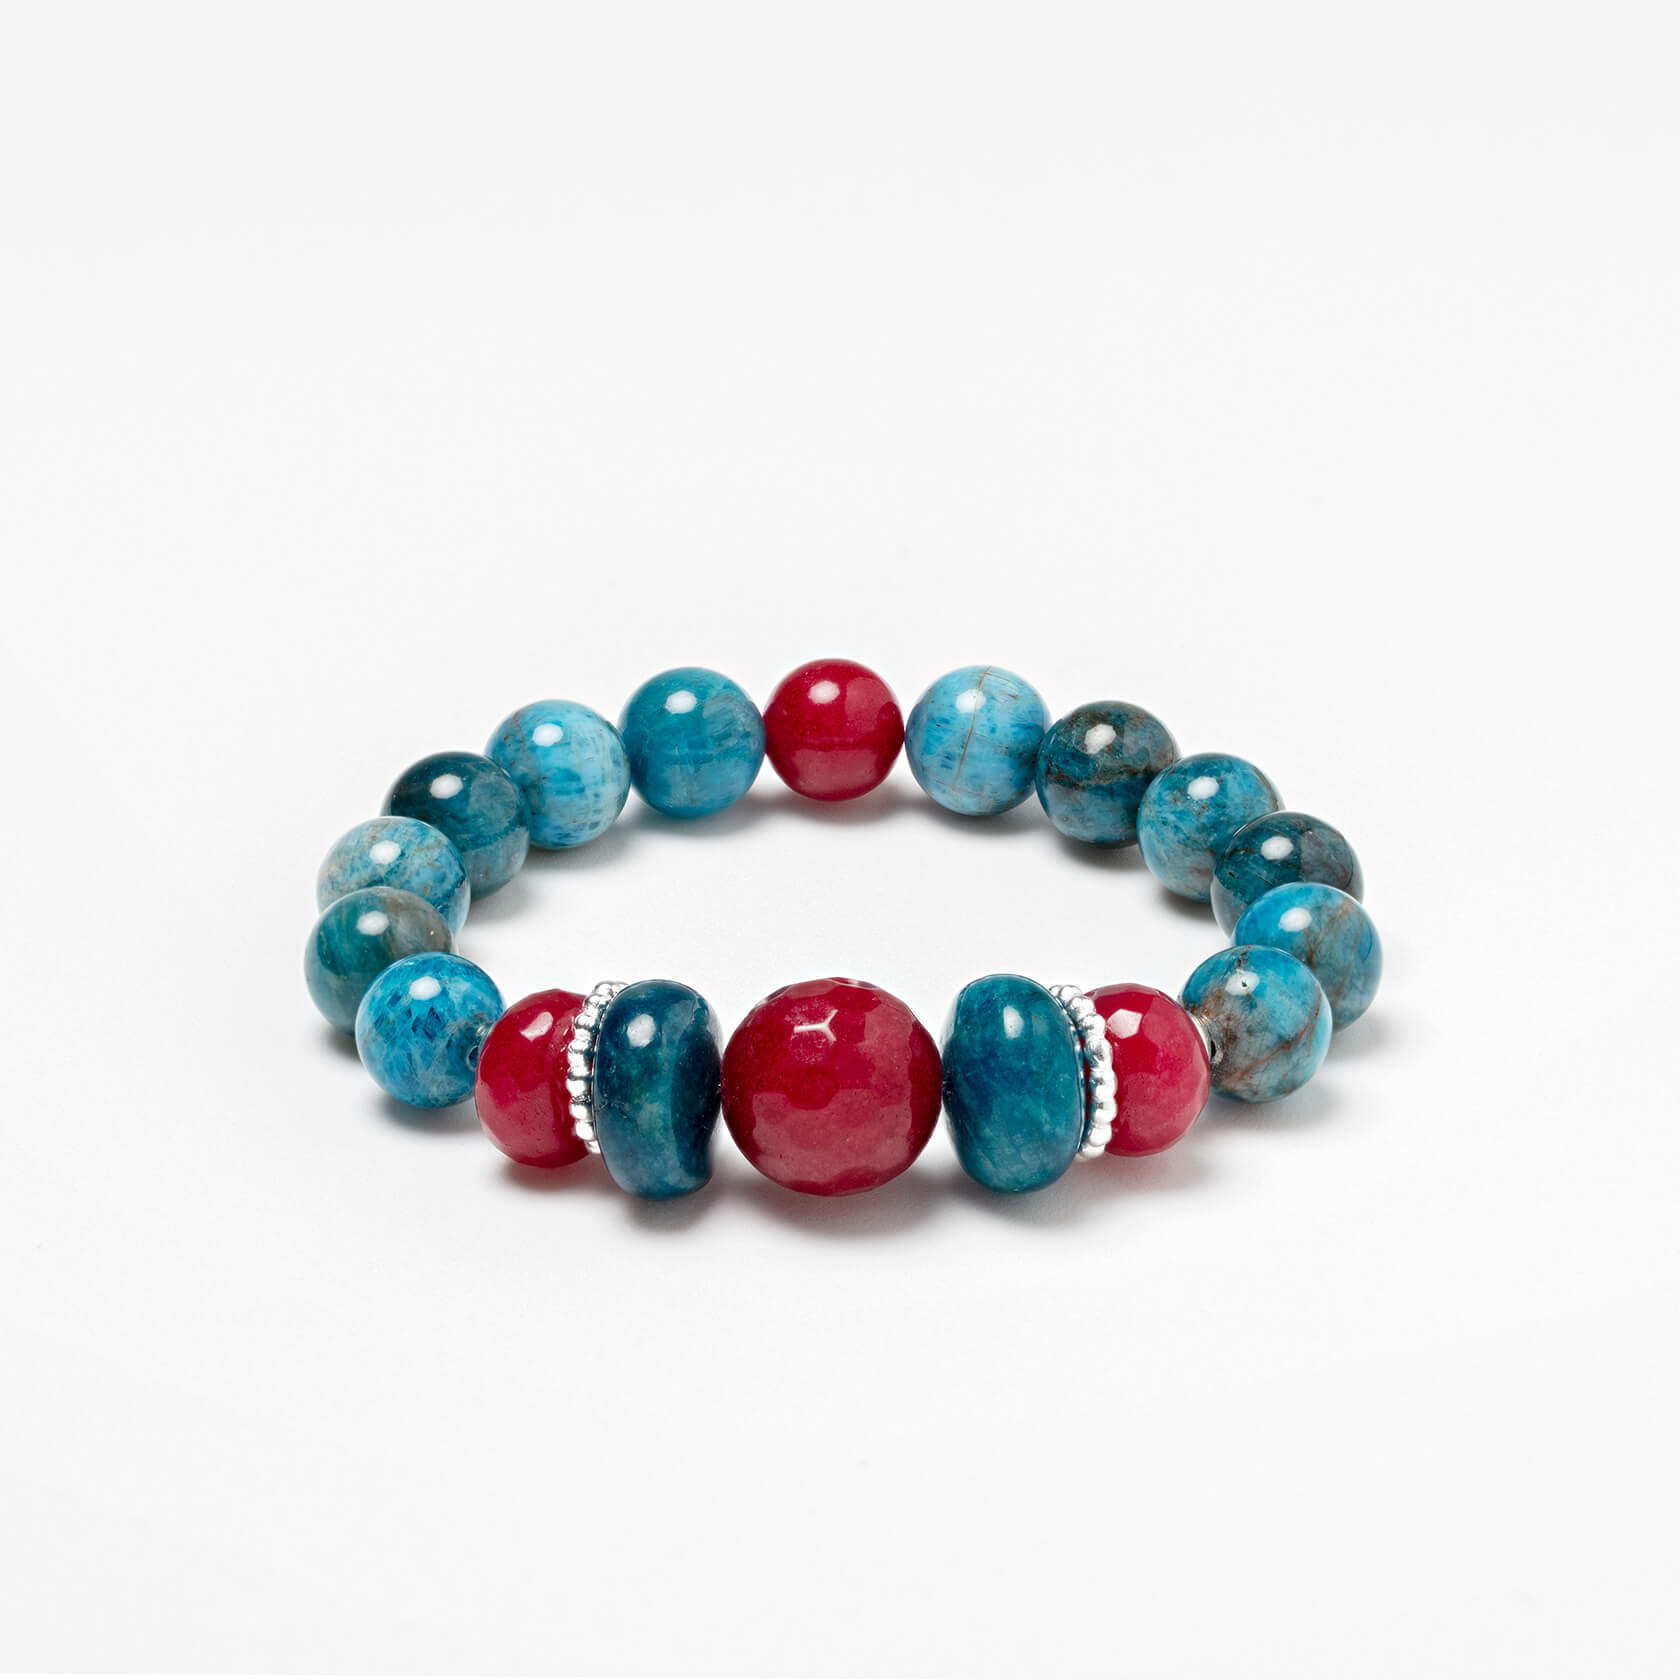 Apatite bracelet with agate